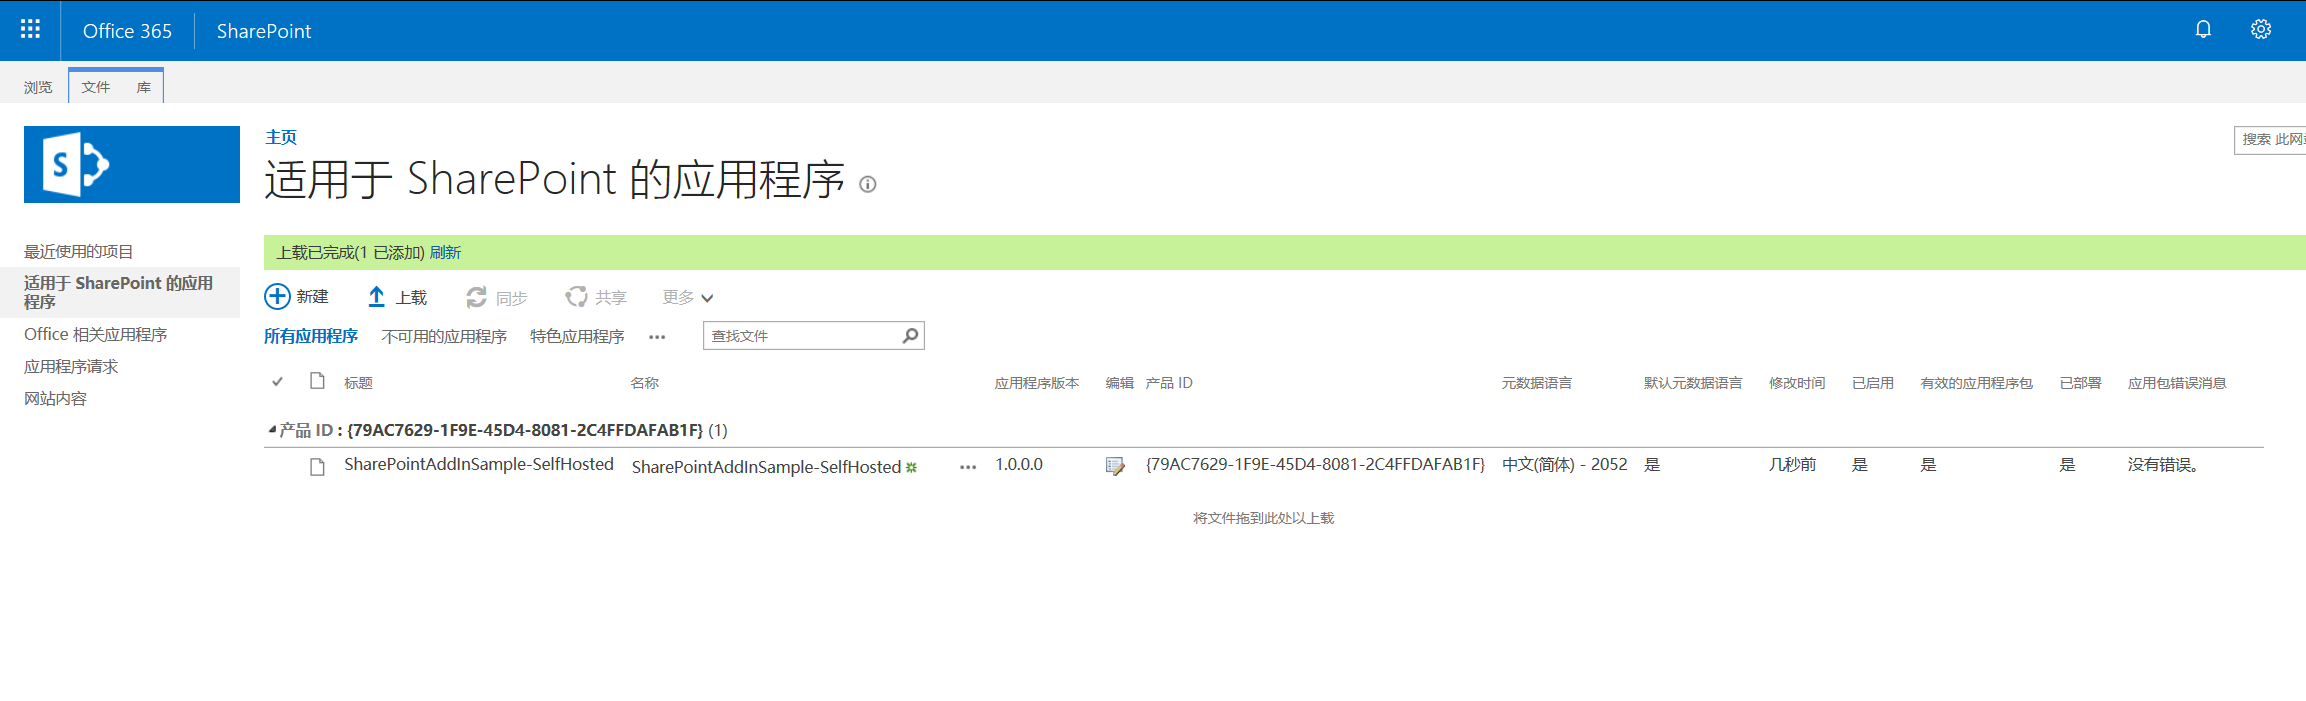 SharePoint Add-in 开发 - 图24